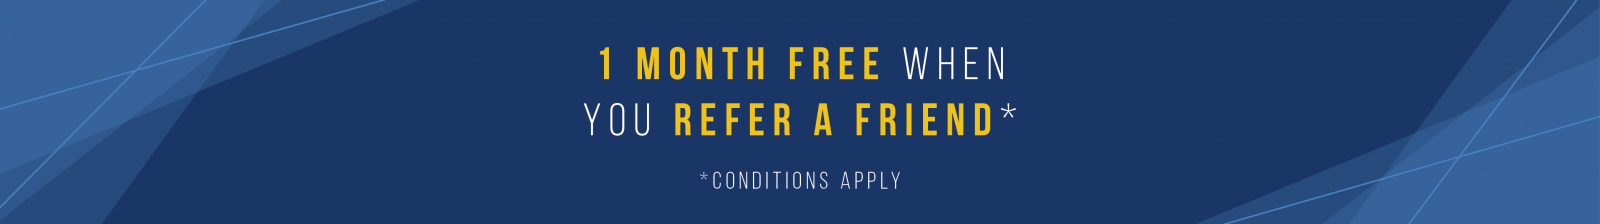 1 month free when you refer a friend. Conditions apply.